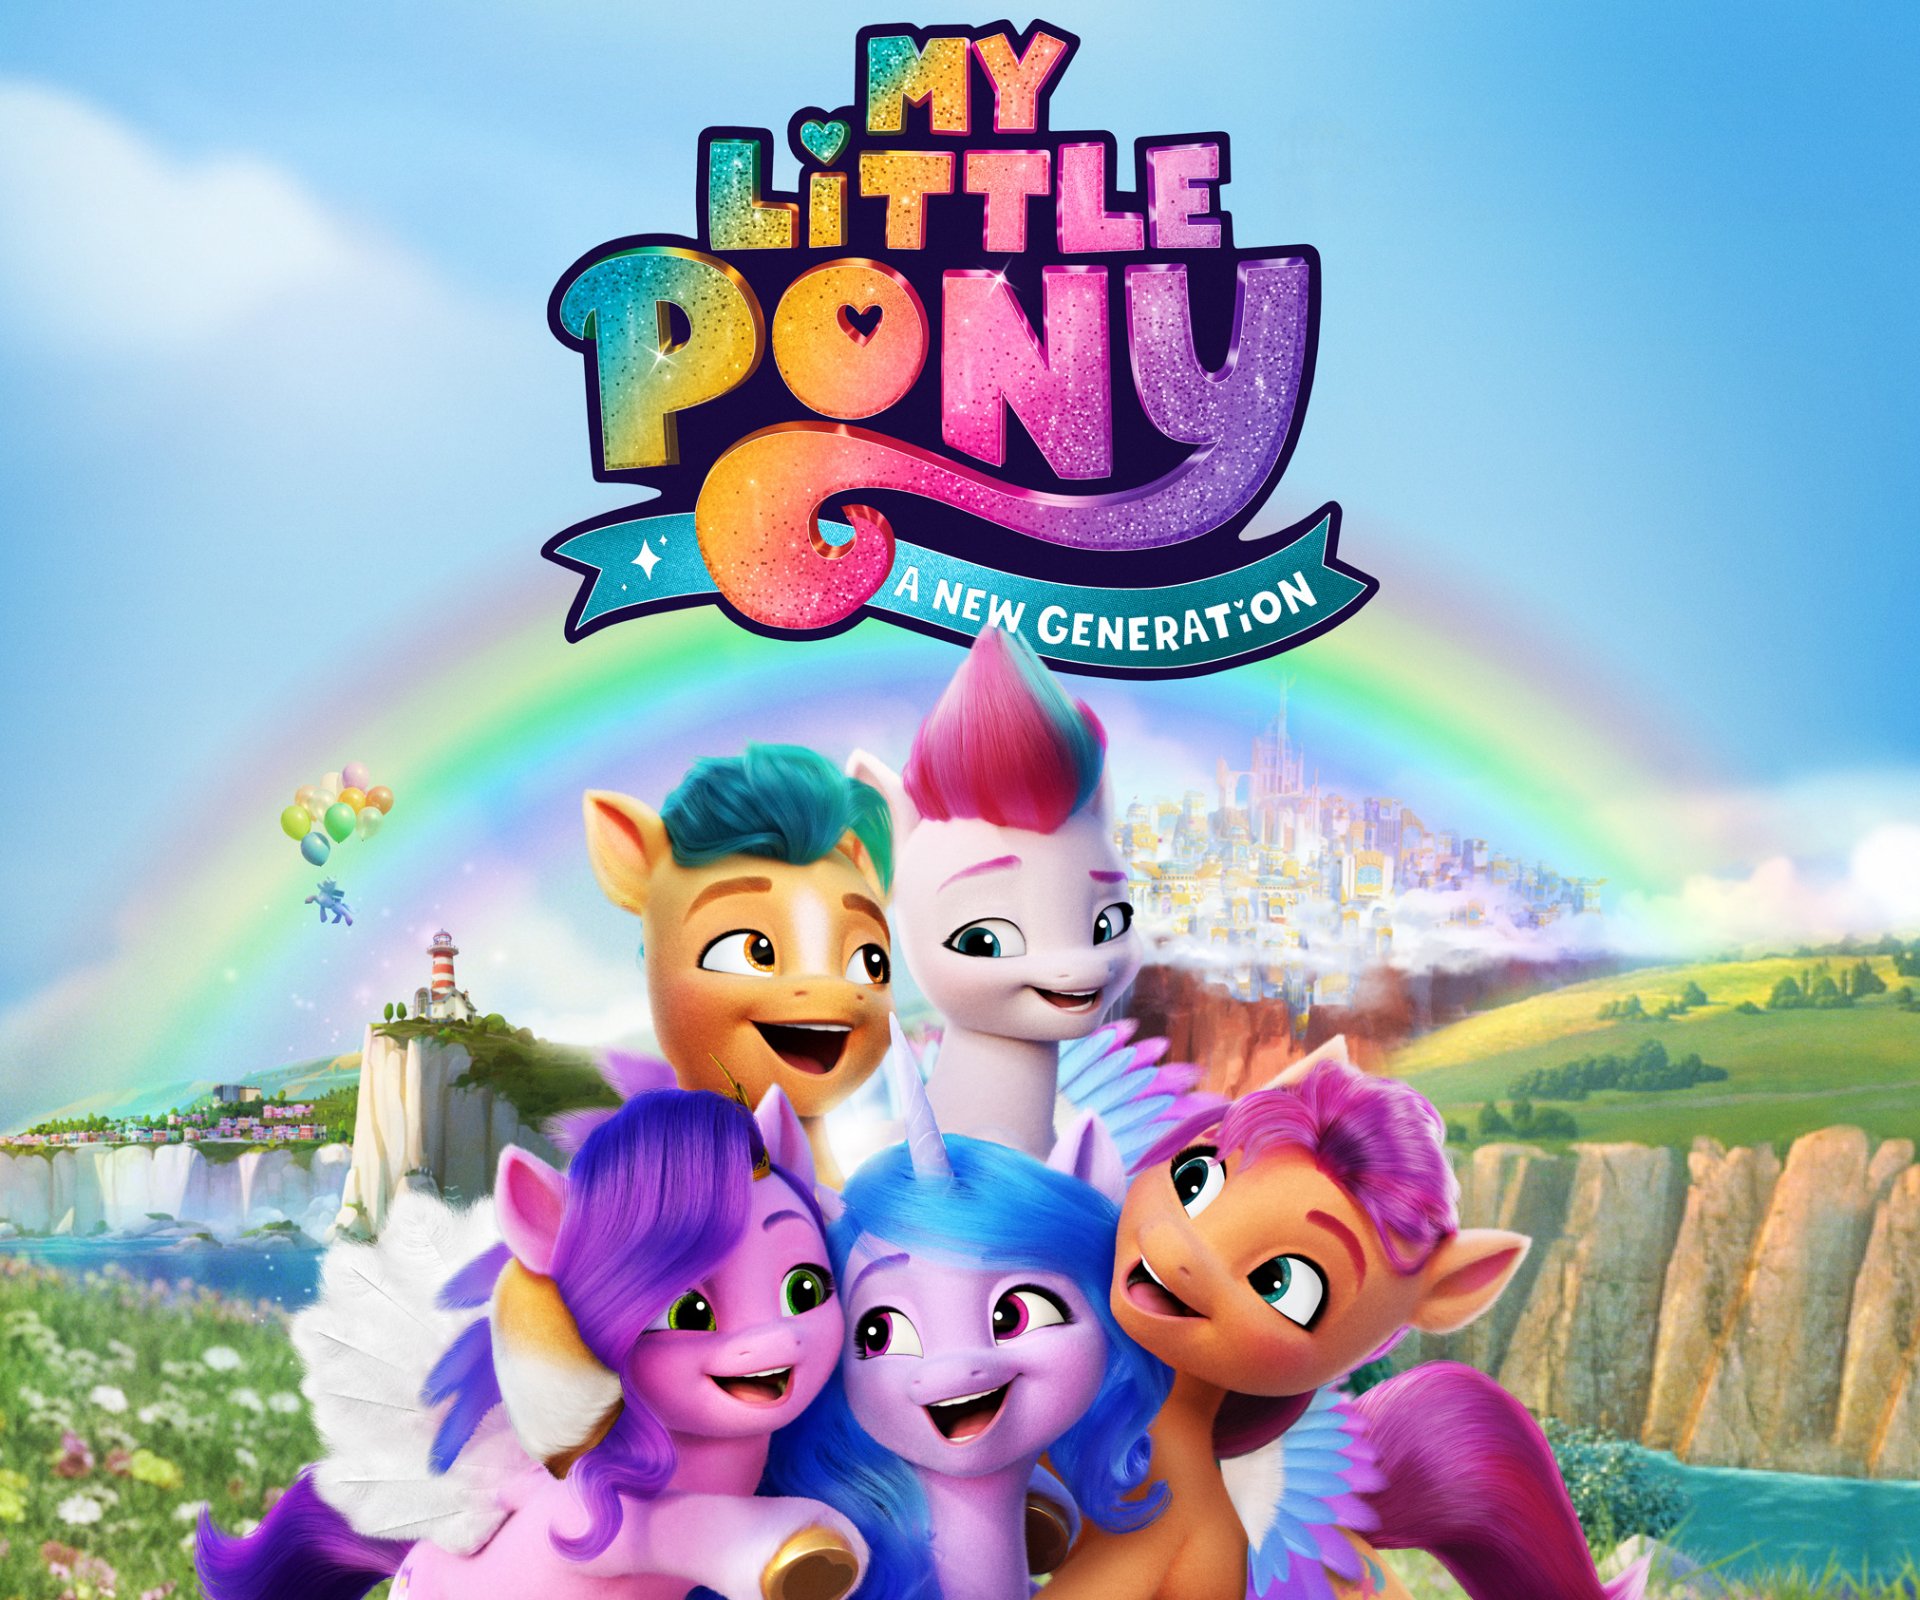 My little pony a new generation hd papers and backgrounds